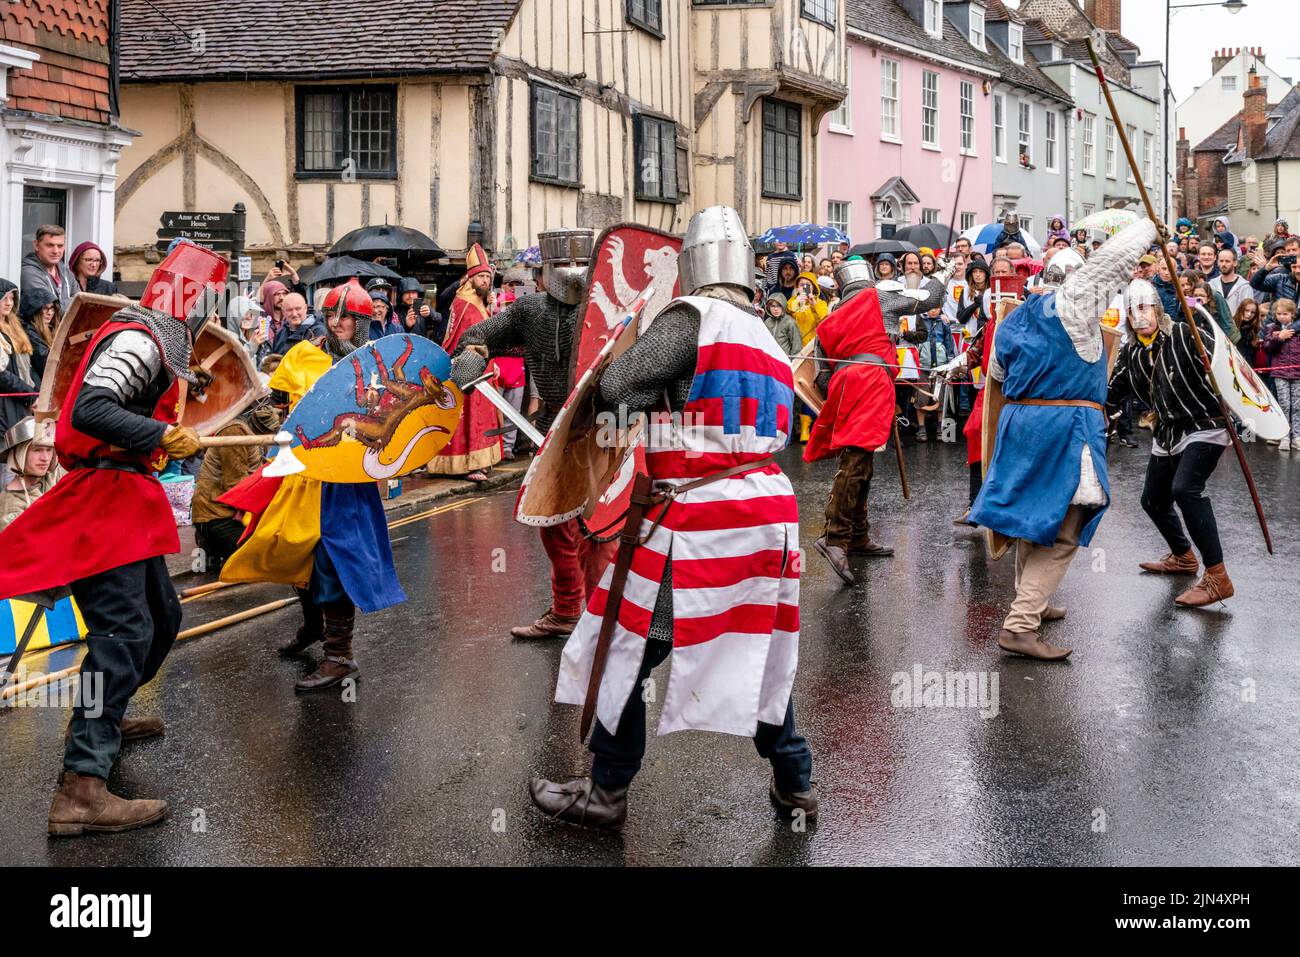 People Dressed In Medieval Costume Take Part In A Re-Enactment Of The 13th Century Battle Of Lewes, Lewes, East Sussex, UK. Stock Photo